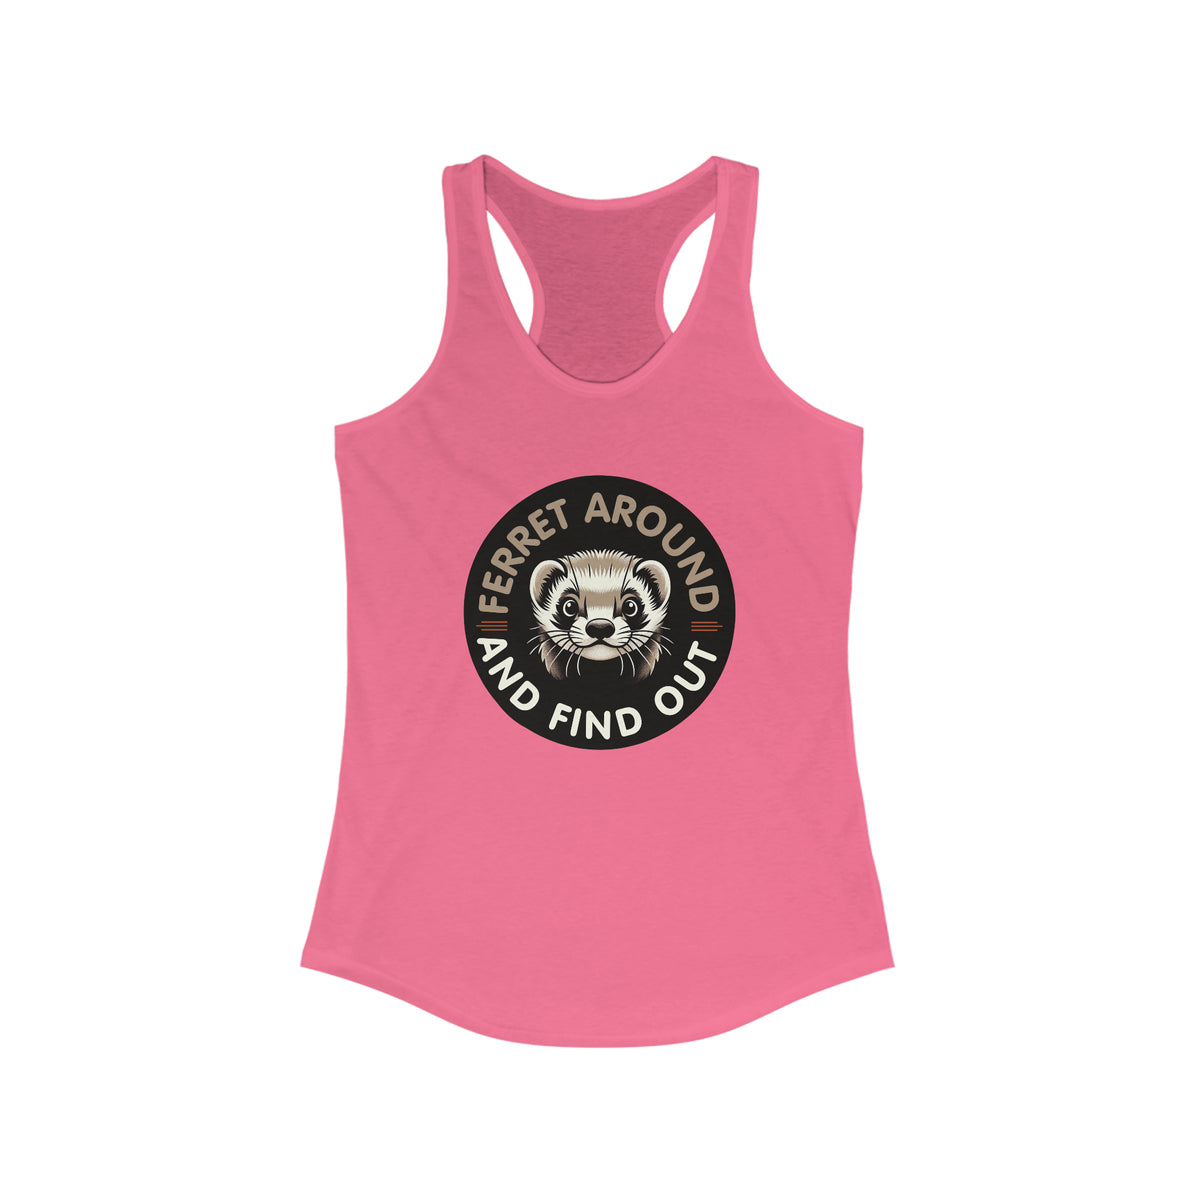 Ferret Around And Find Cute Ferret Shirt | Sarcastic Shirt | Funny Pet Ferret Gifts | Women's Slim-fit Racerback Tank Top